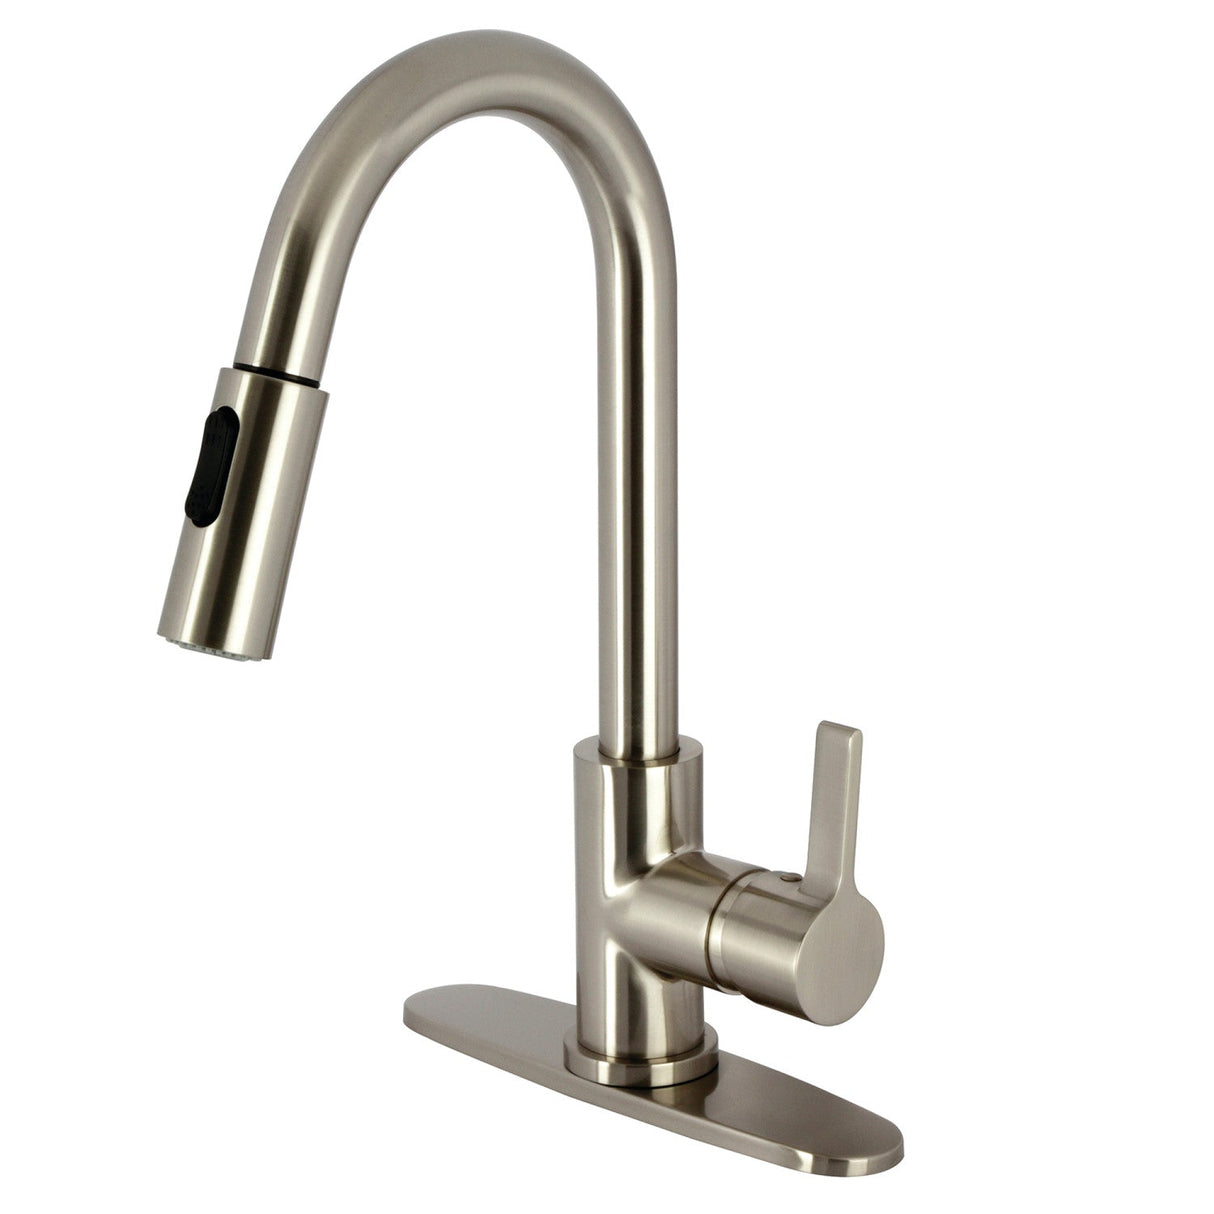 Continental LS8788CTL Single-Handle 1-Hole Deck Mount Pull-Down Sprayer Kitchen Faucet, Brushed Nickel